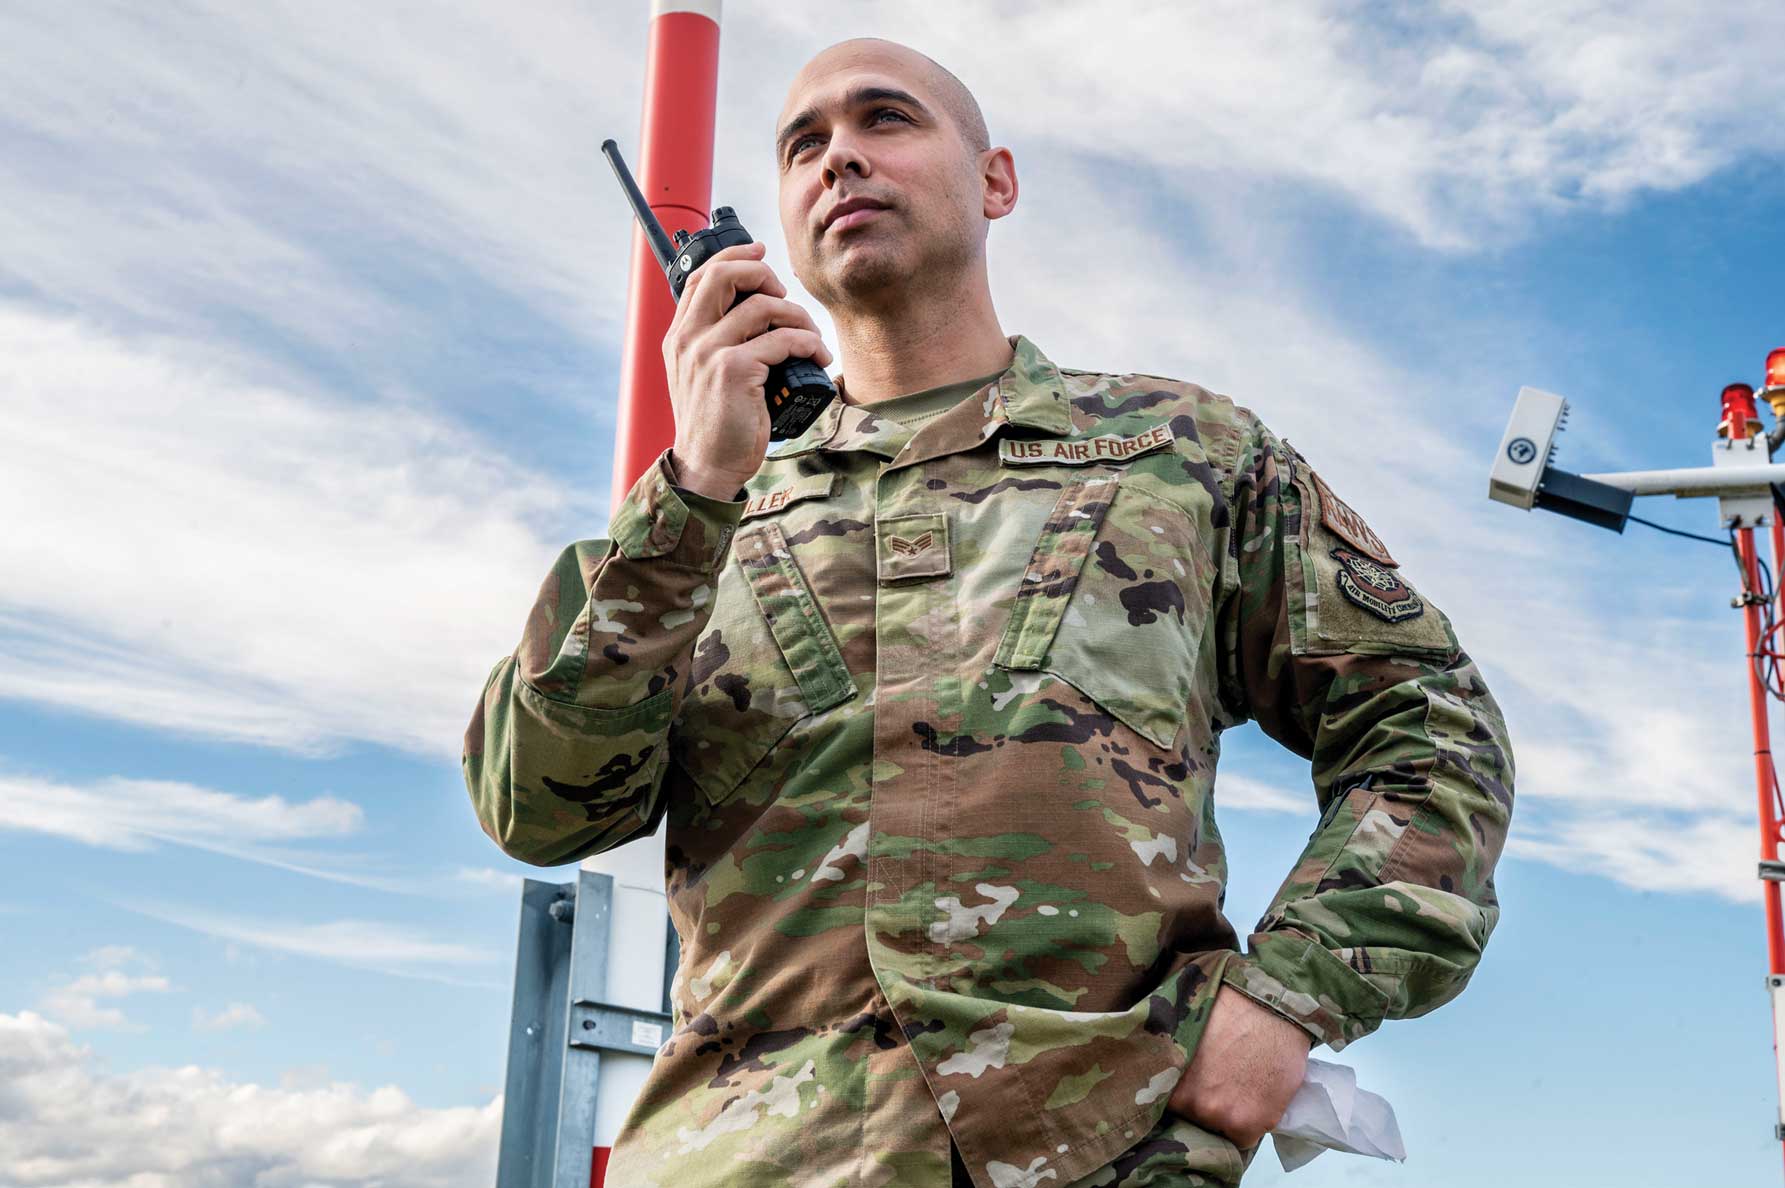 A man in camouflage holding a radio and looking up.